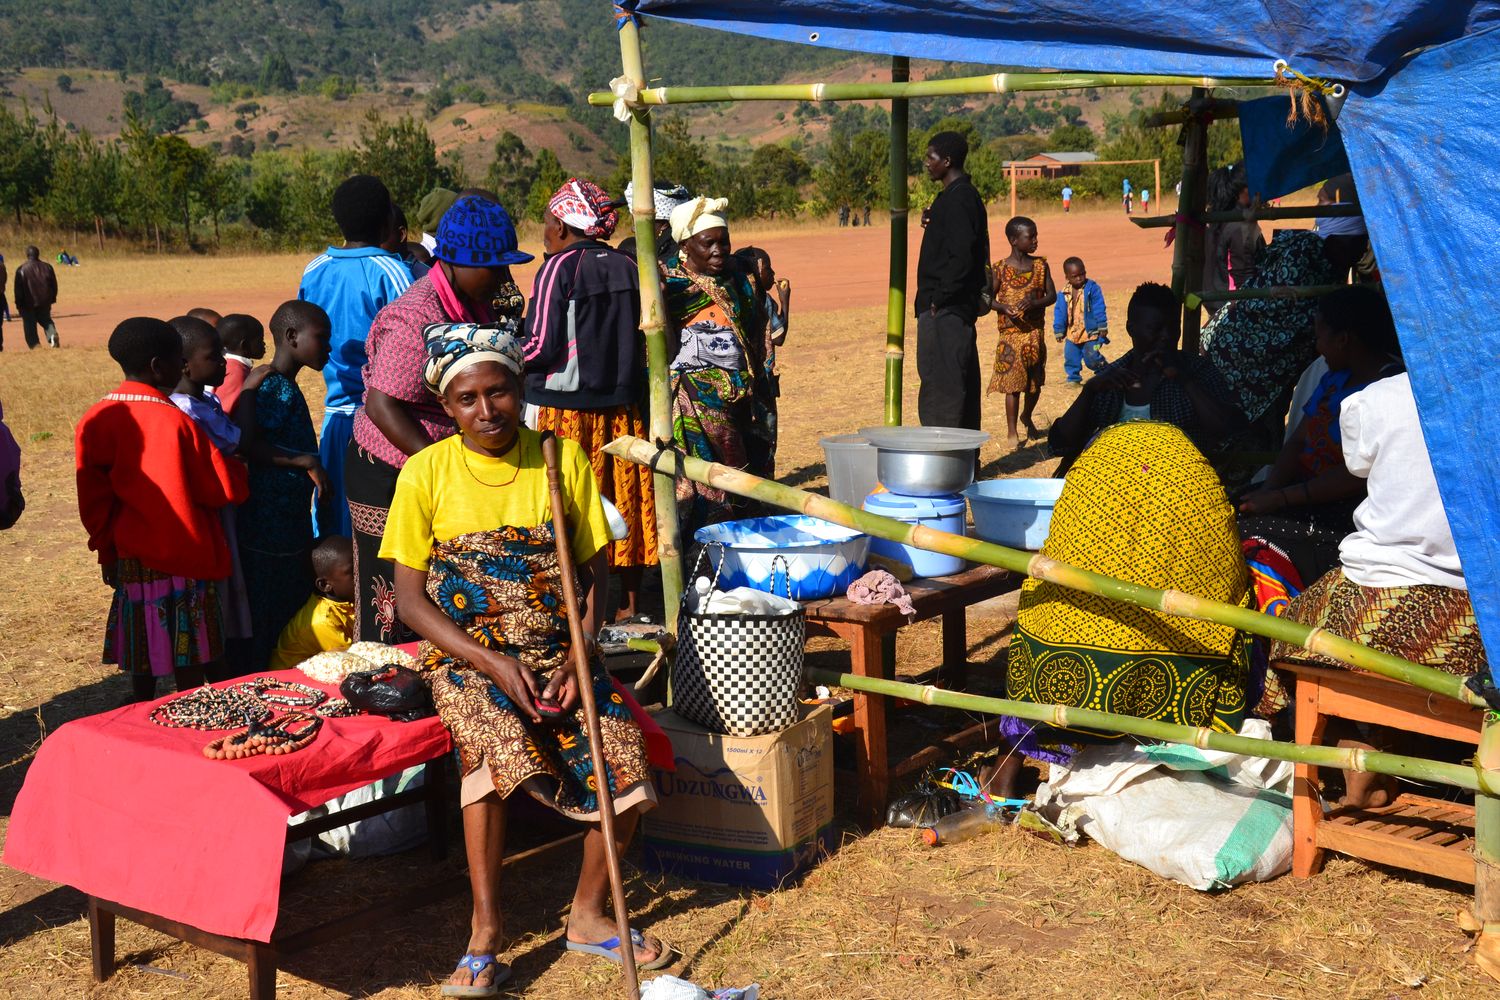 Locals selling crafts and traditional food